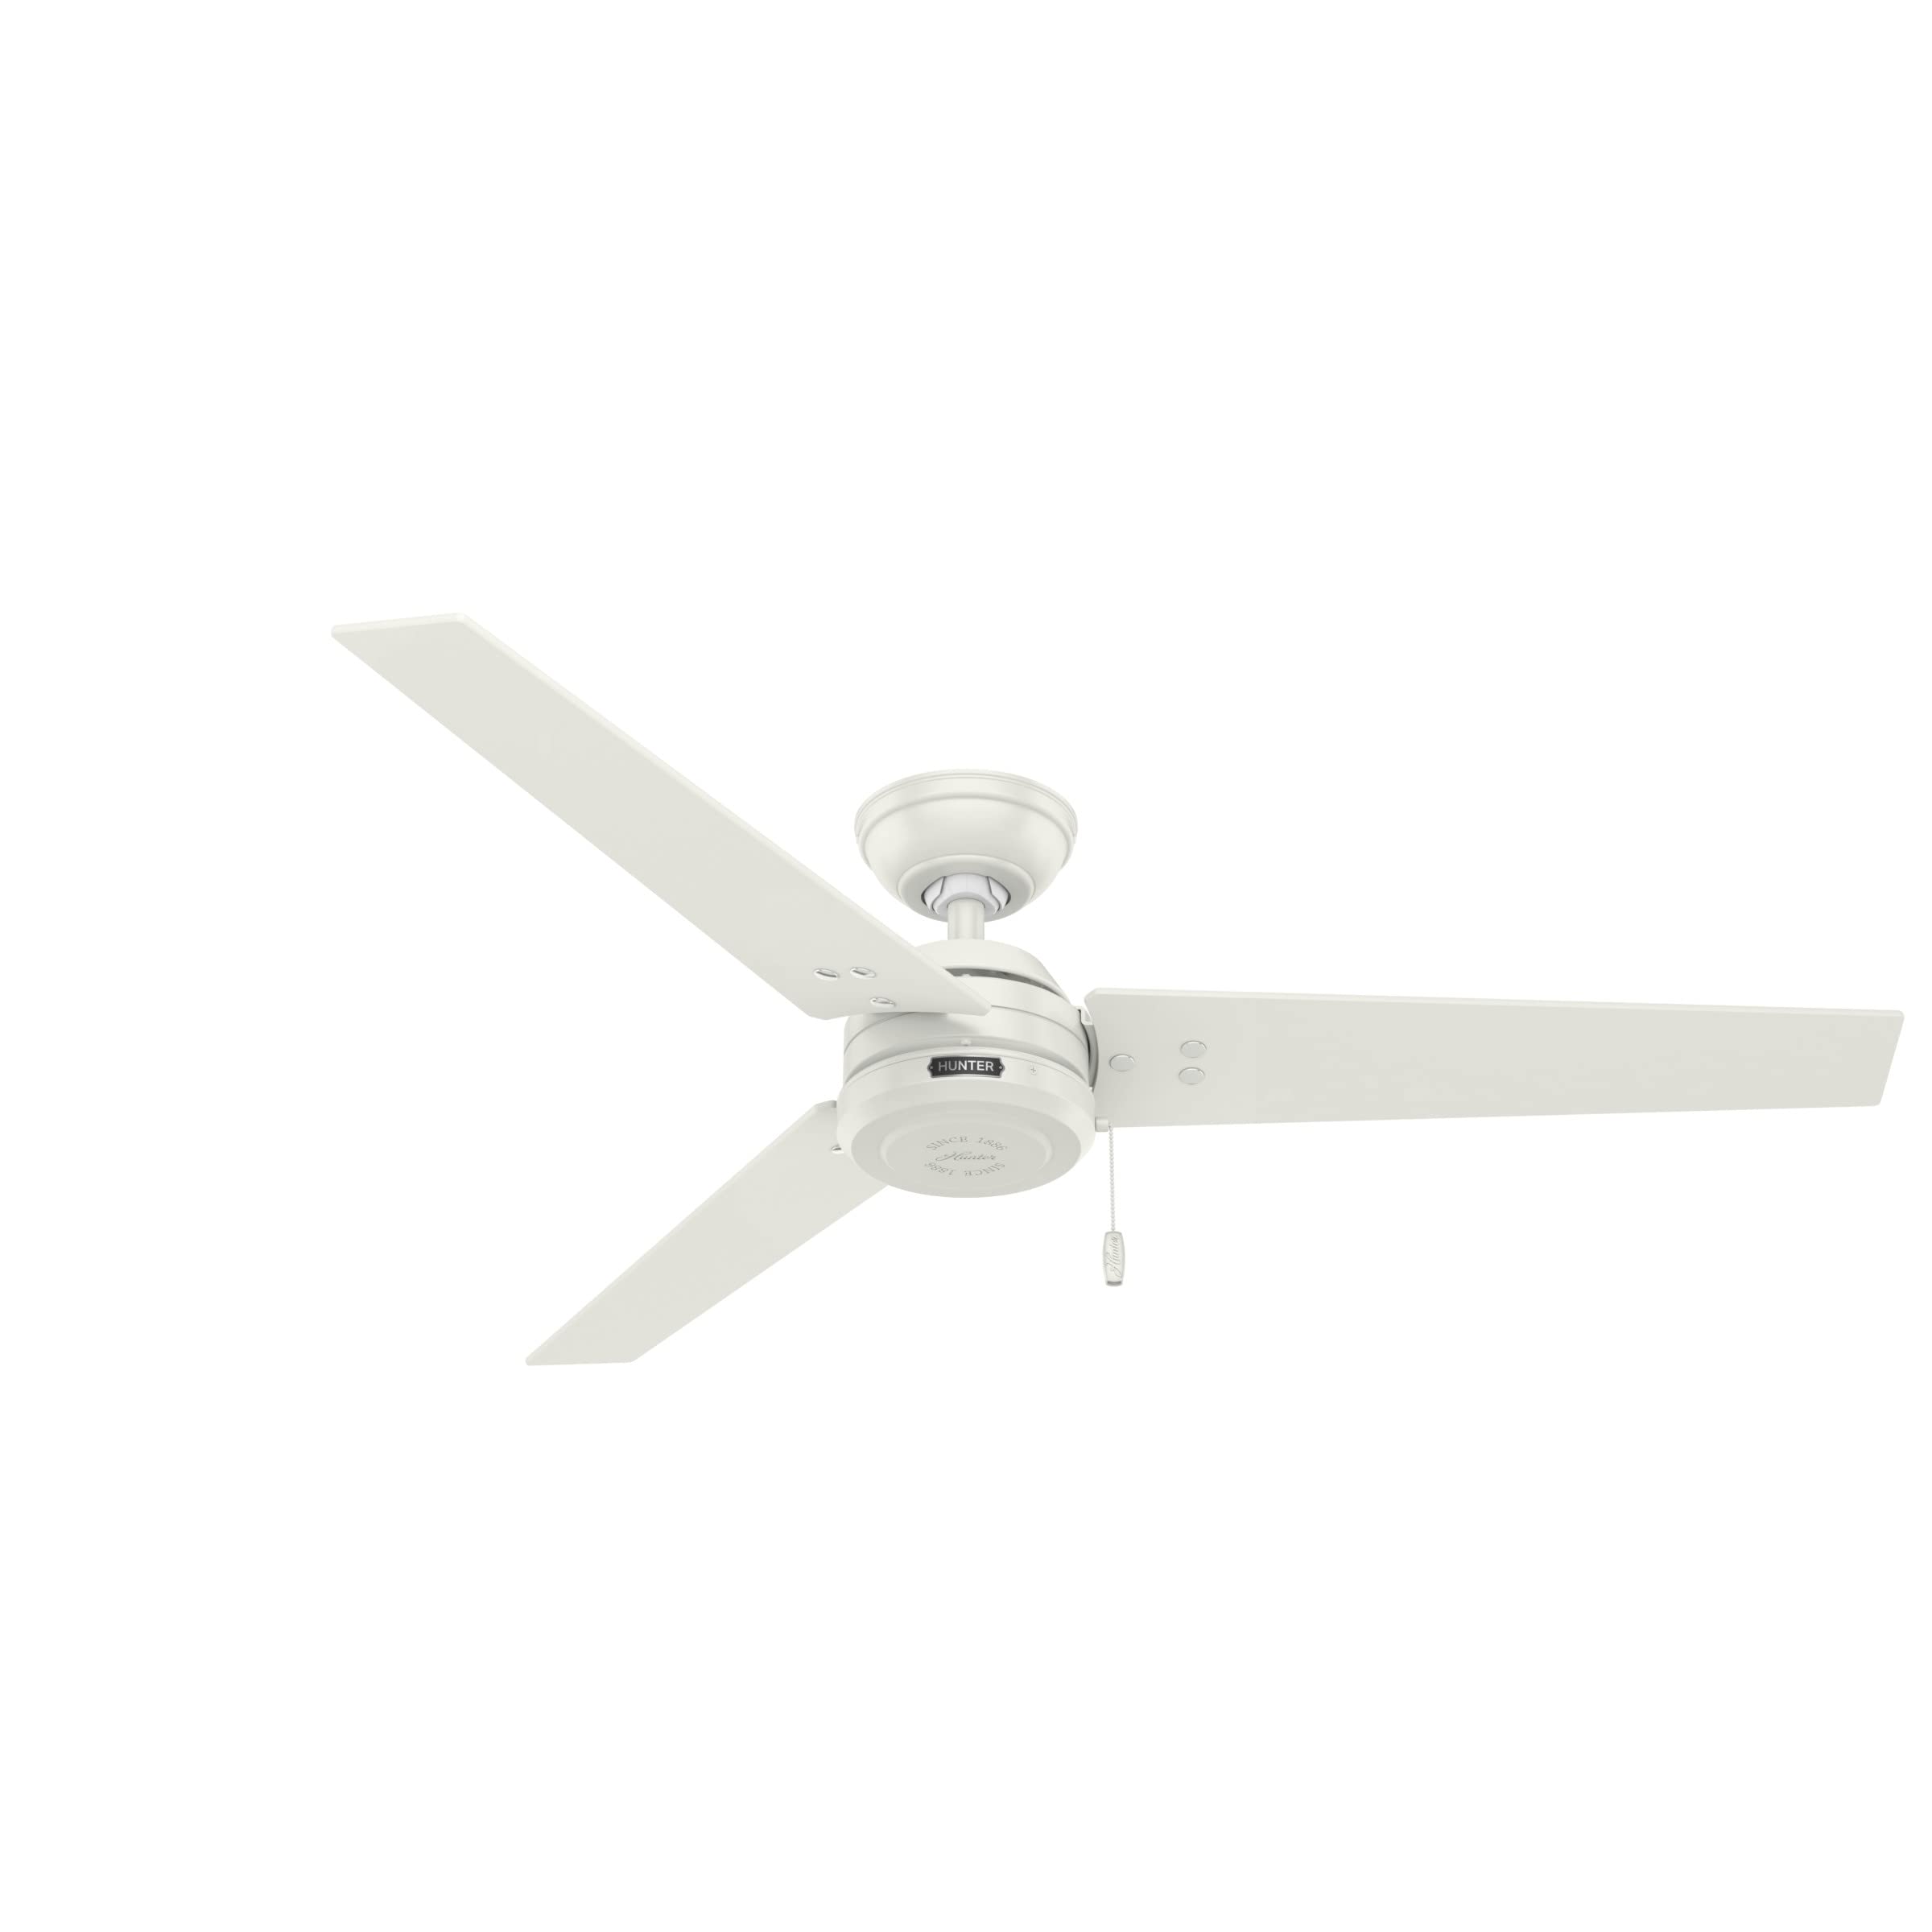 Hunter Fan Company 59263 Cassius 52 Inch 3 Blade 3 Speed Wooden Indoor/Outdoor Ceiling Fan with Pull Chain Control, Light Stripe, 52